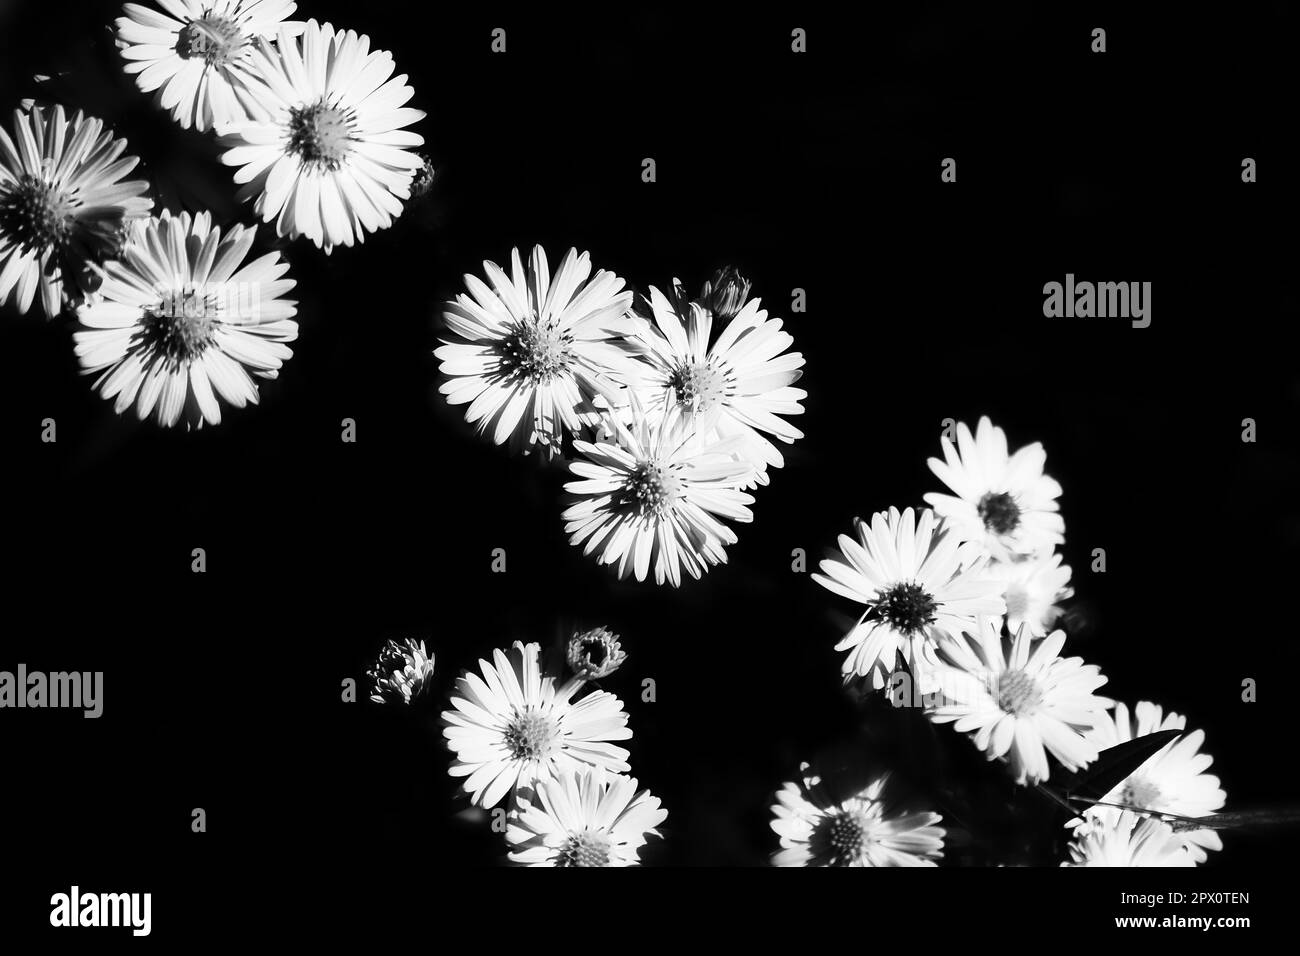 Daisy with many flowers with black background. Black and white depicted. Flowers isolated. Flower photo from nature. Stock Photo